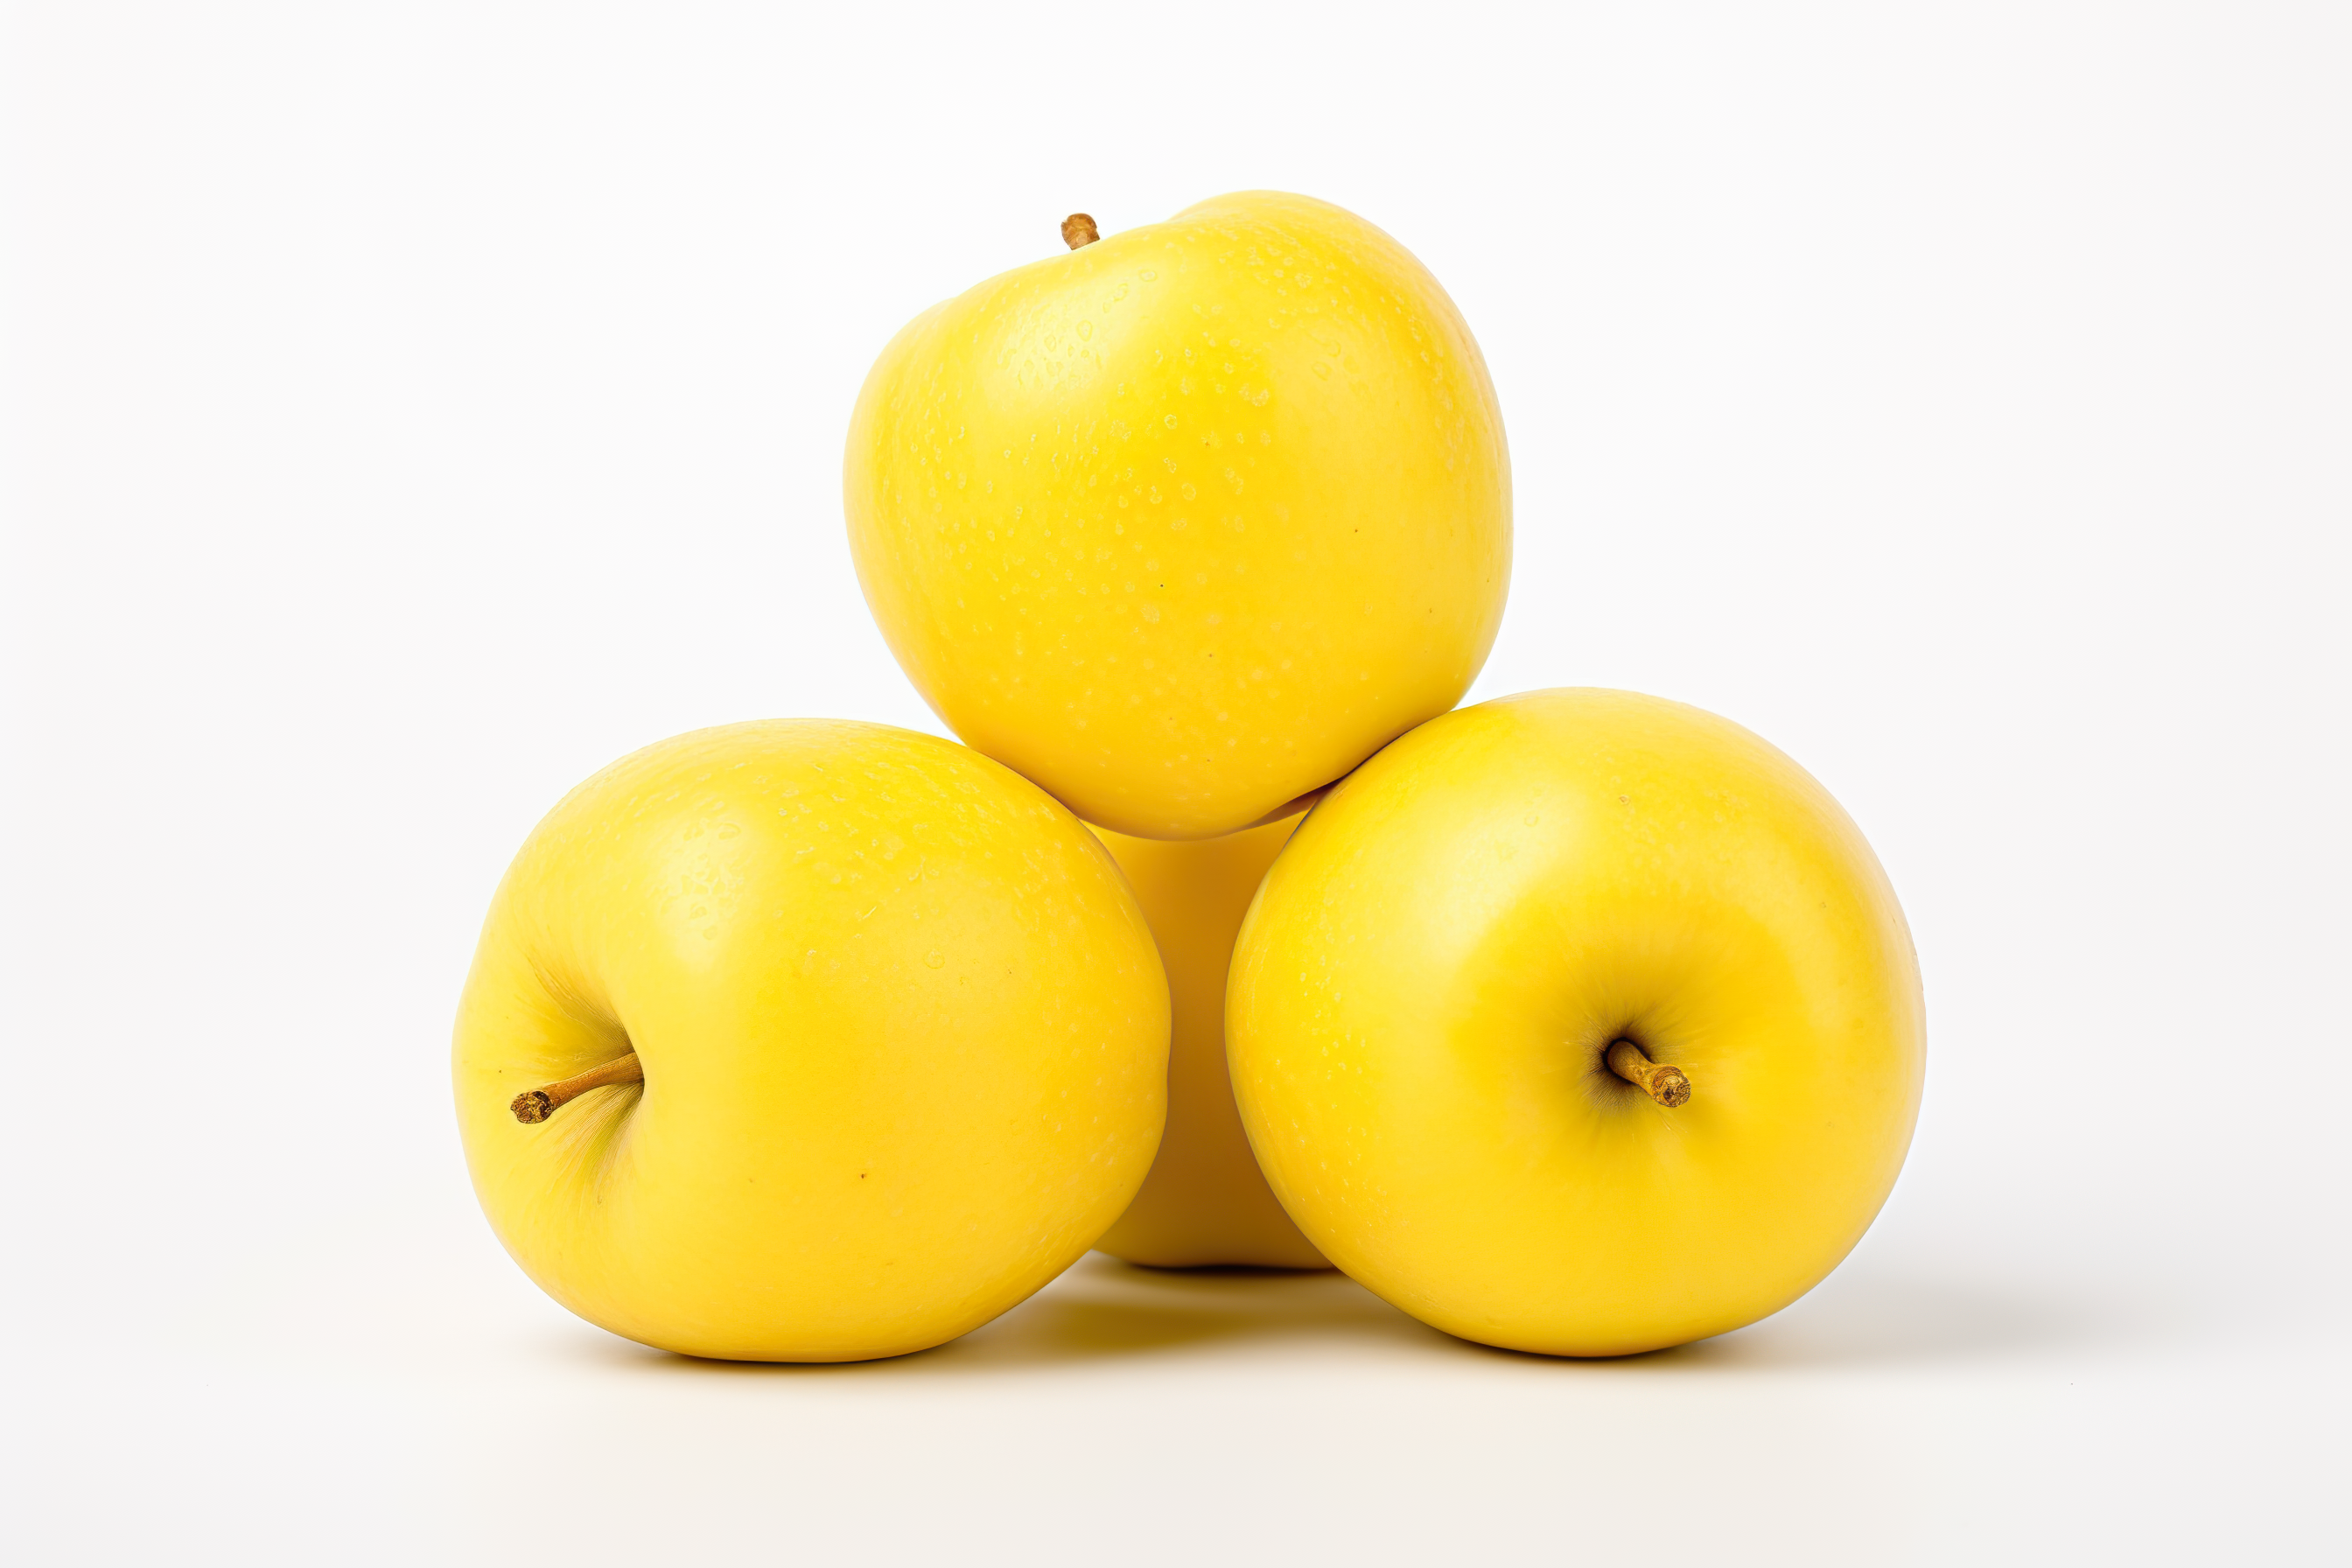 Ripe yellow apple isolated on white background